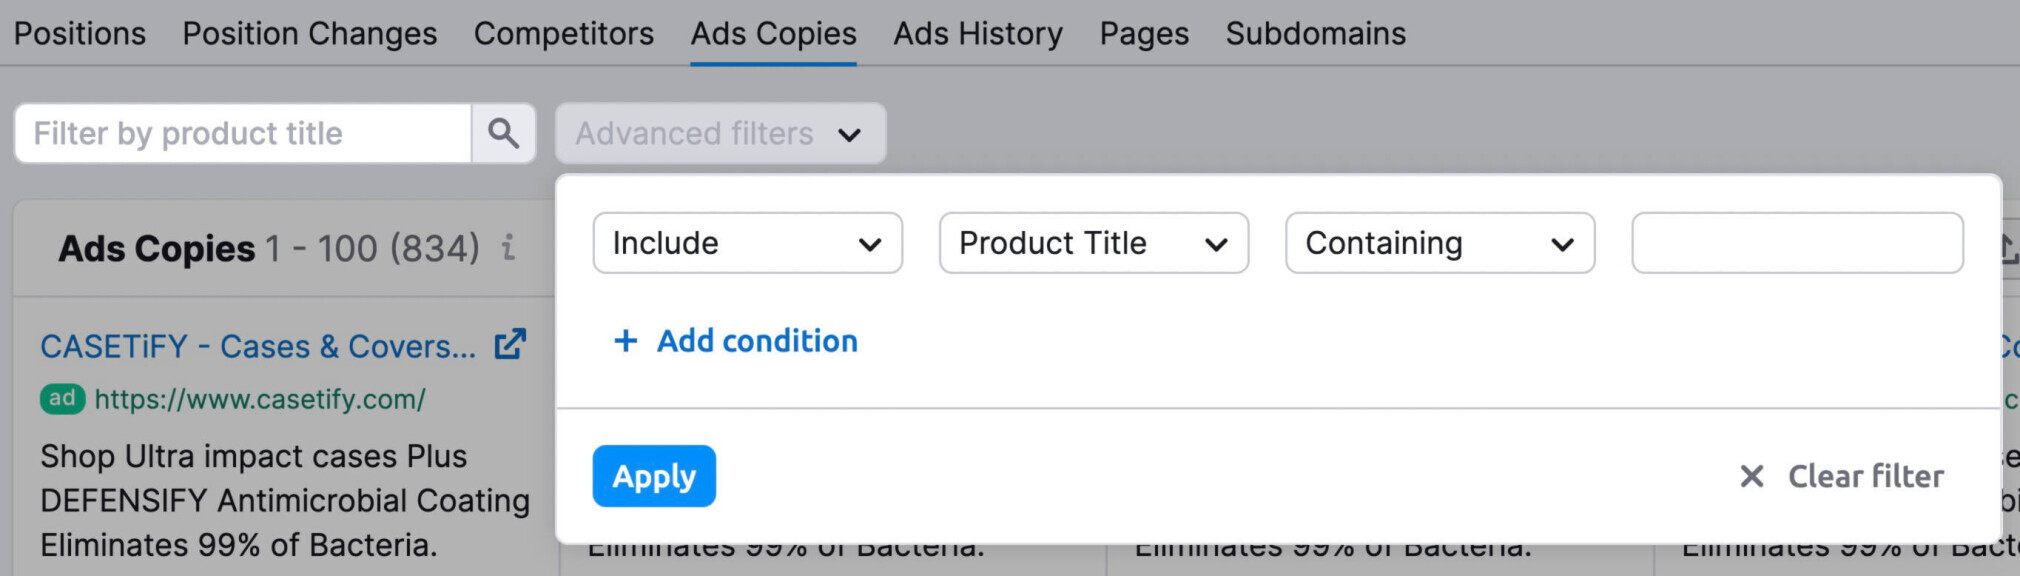 filtering by product in Ad Copies report